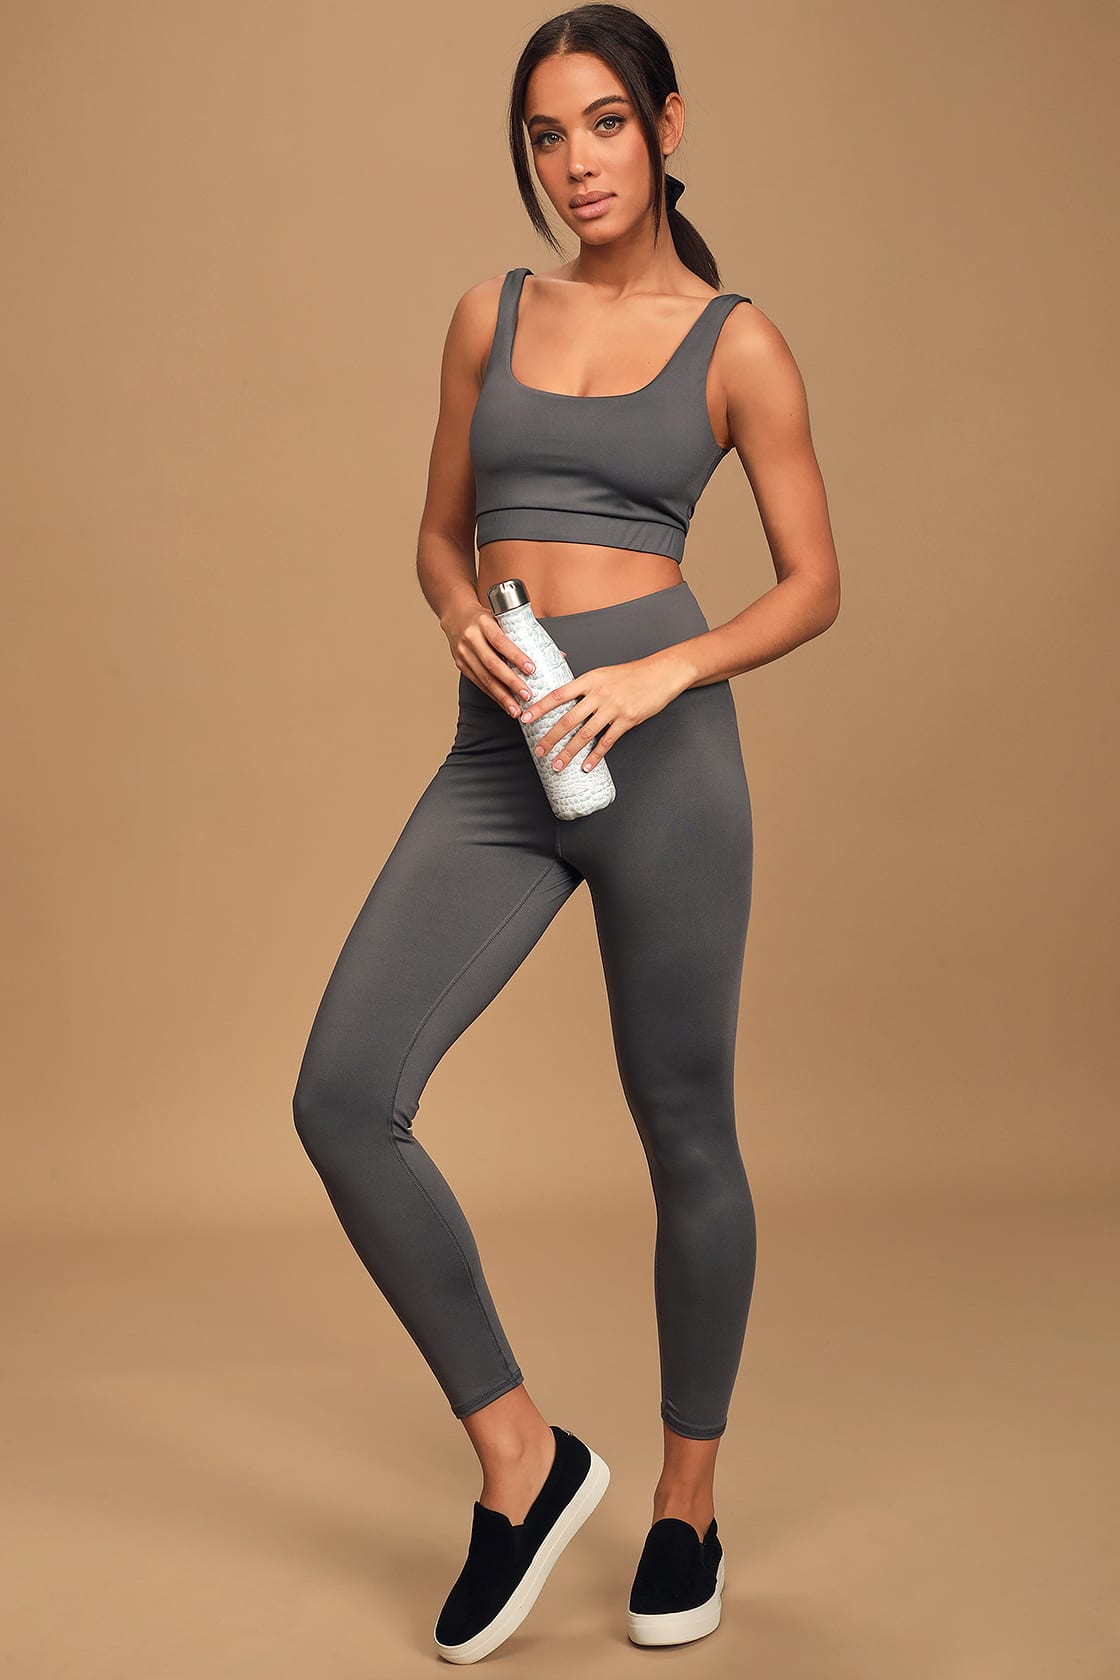 Lulus Making Moves Charcoal Grey High-Waisted Leggings